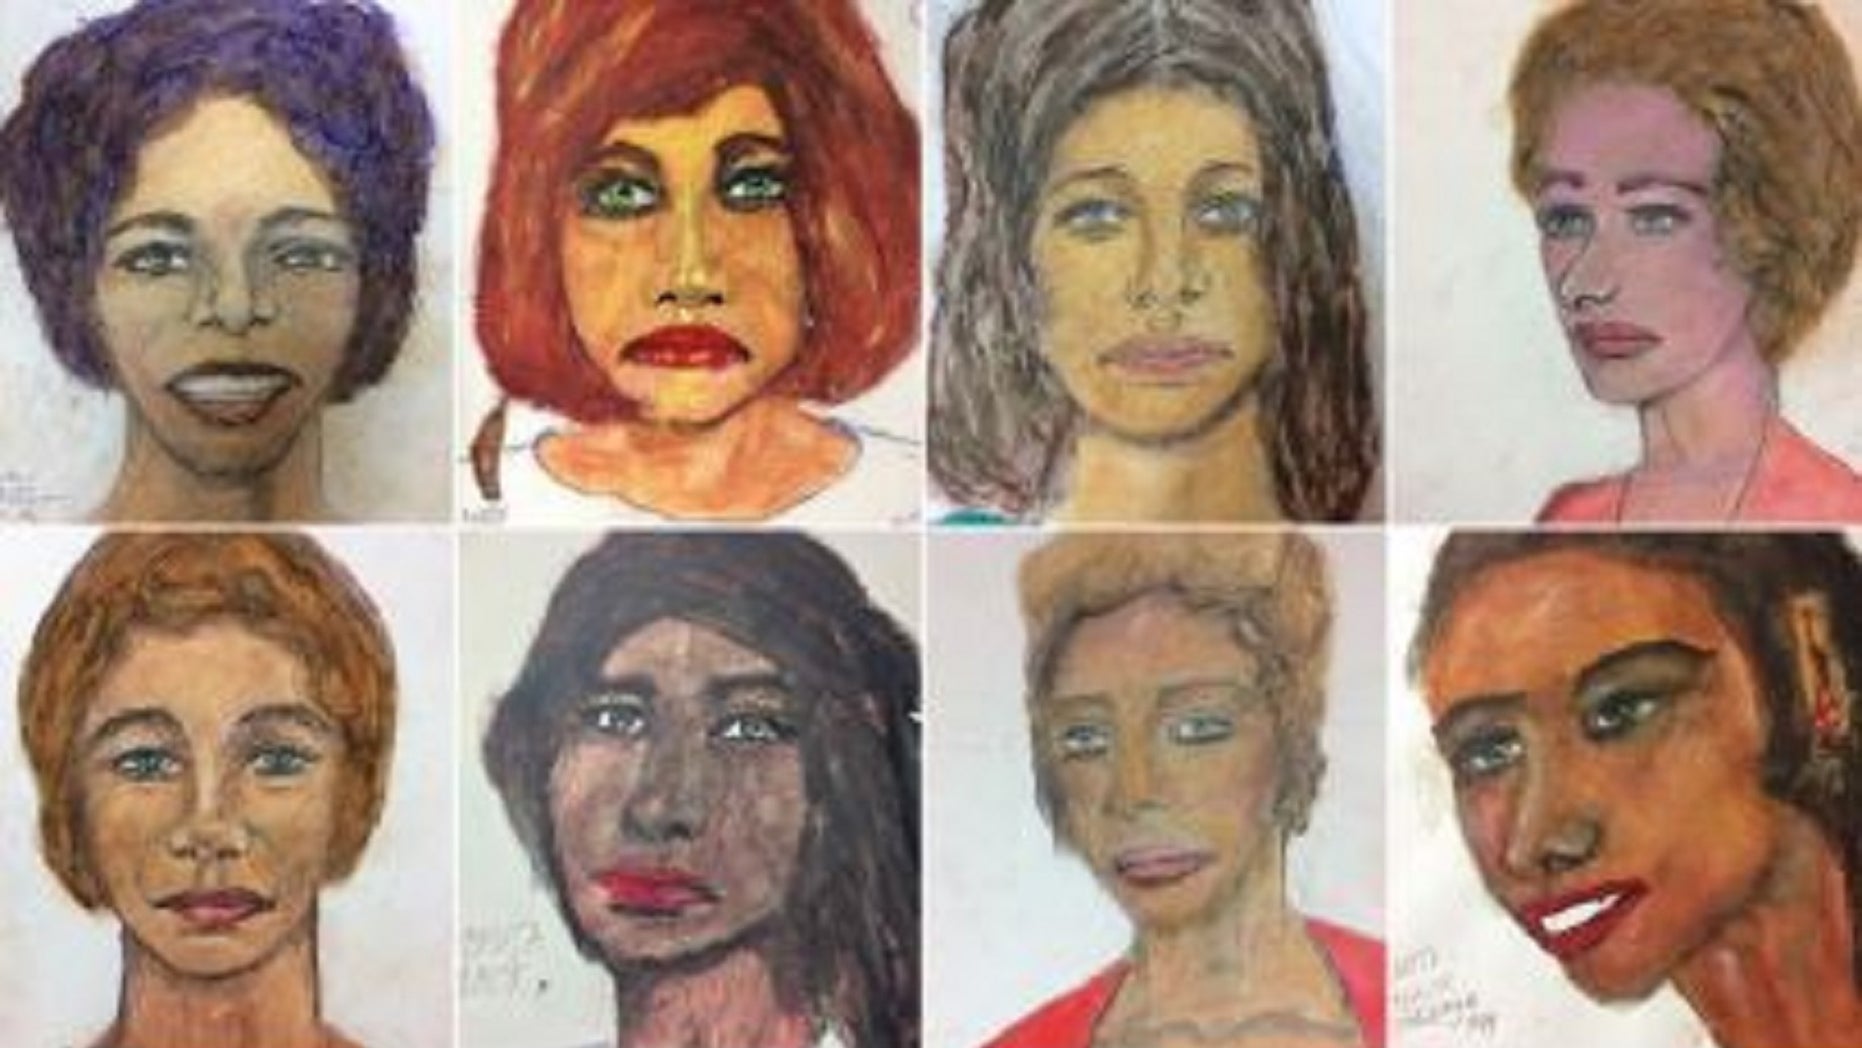 Fbi Wants Help In Identifying Victims From Portraits Drawn By Serial Killer Fox News